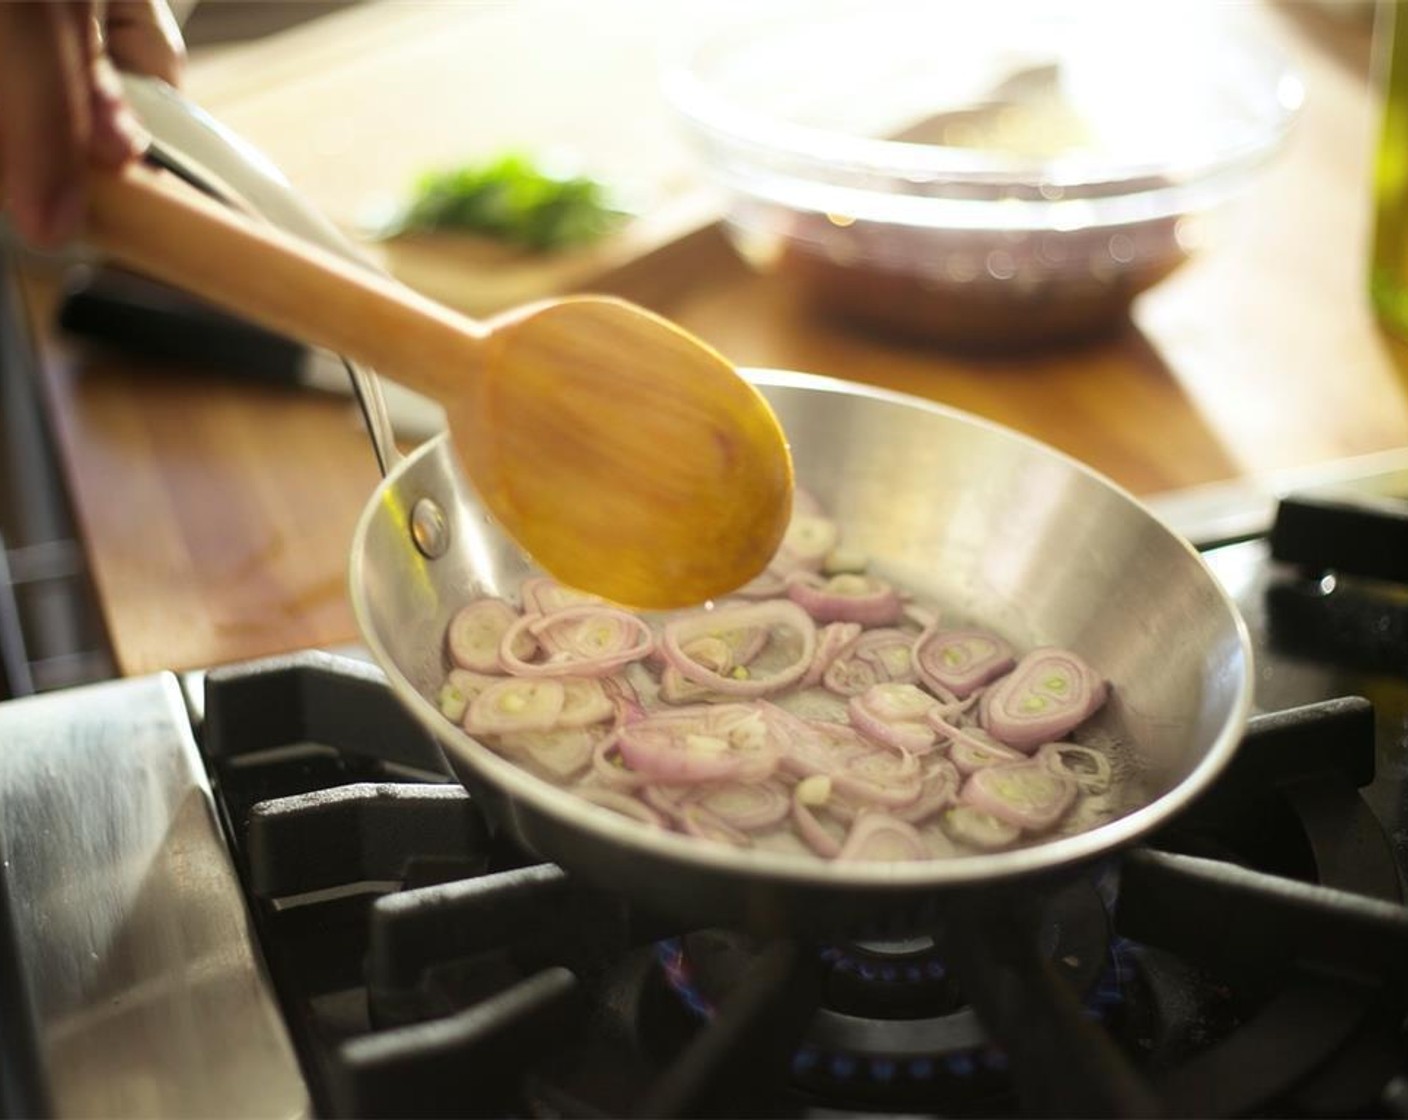 step 4 In a small saute pan over medium heat, heat Rice Vinegar (1 Tbsp) and Granulated Sugar (3 Tbsp). Heat until sugar has dissolved. Add shallots, stir, and cook for five minutes until the shallots have absorbed all the liquid. Remove from heat.